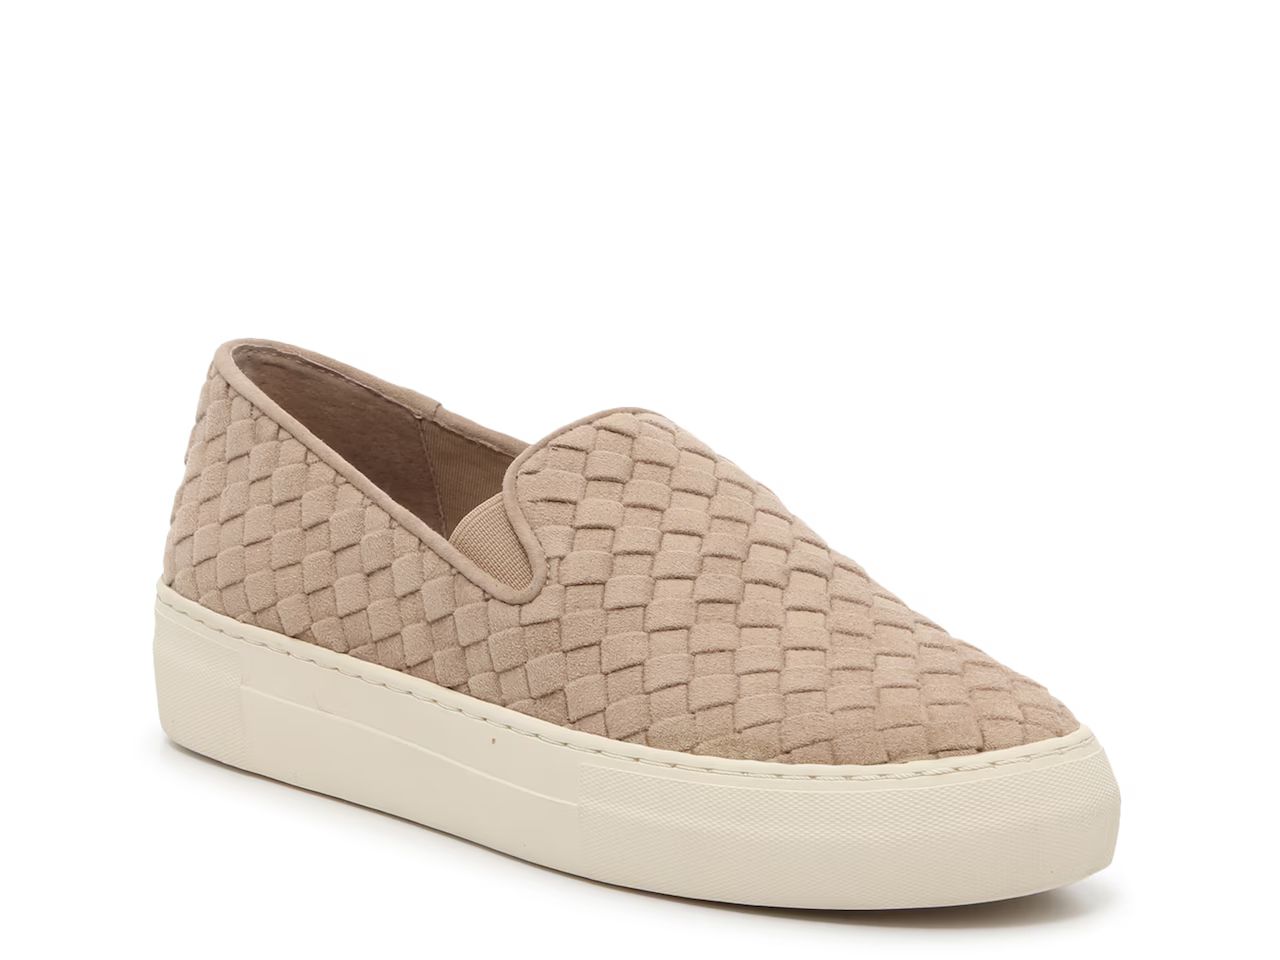 Vince Camuto Camby Slip-On Sneaker | DSW